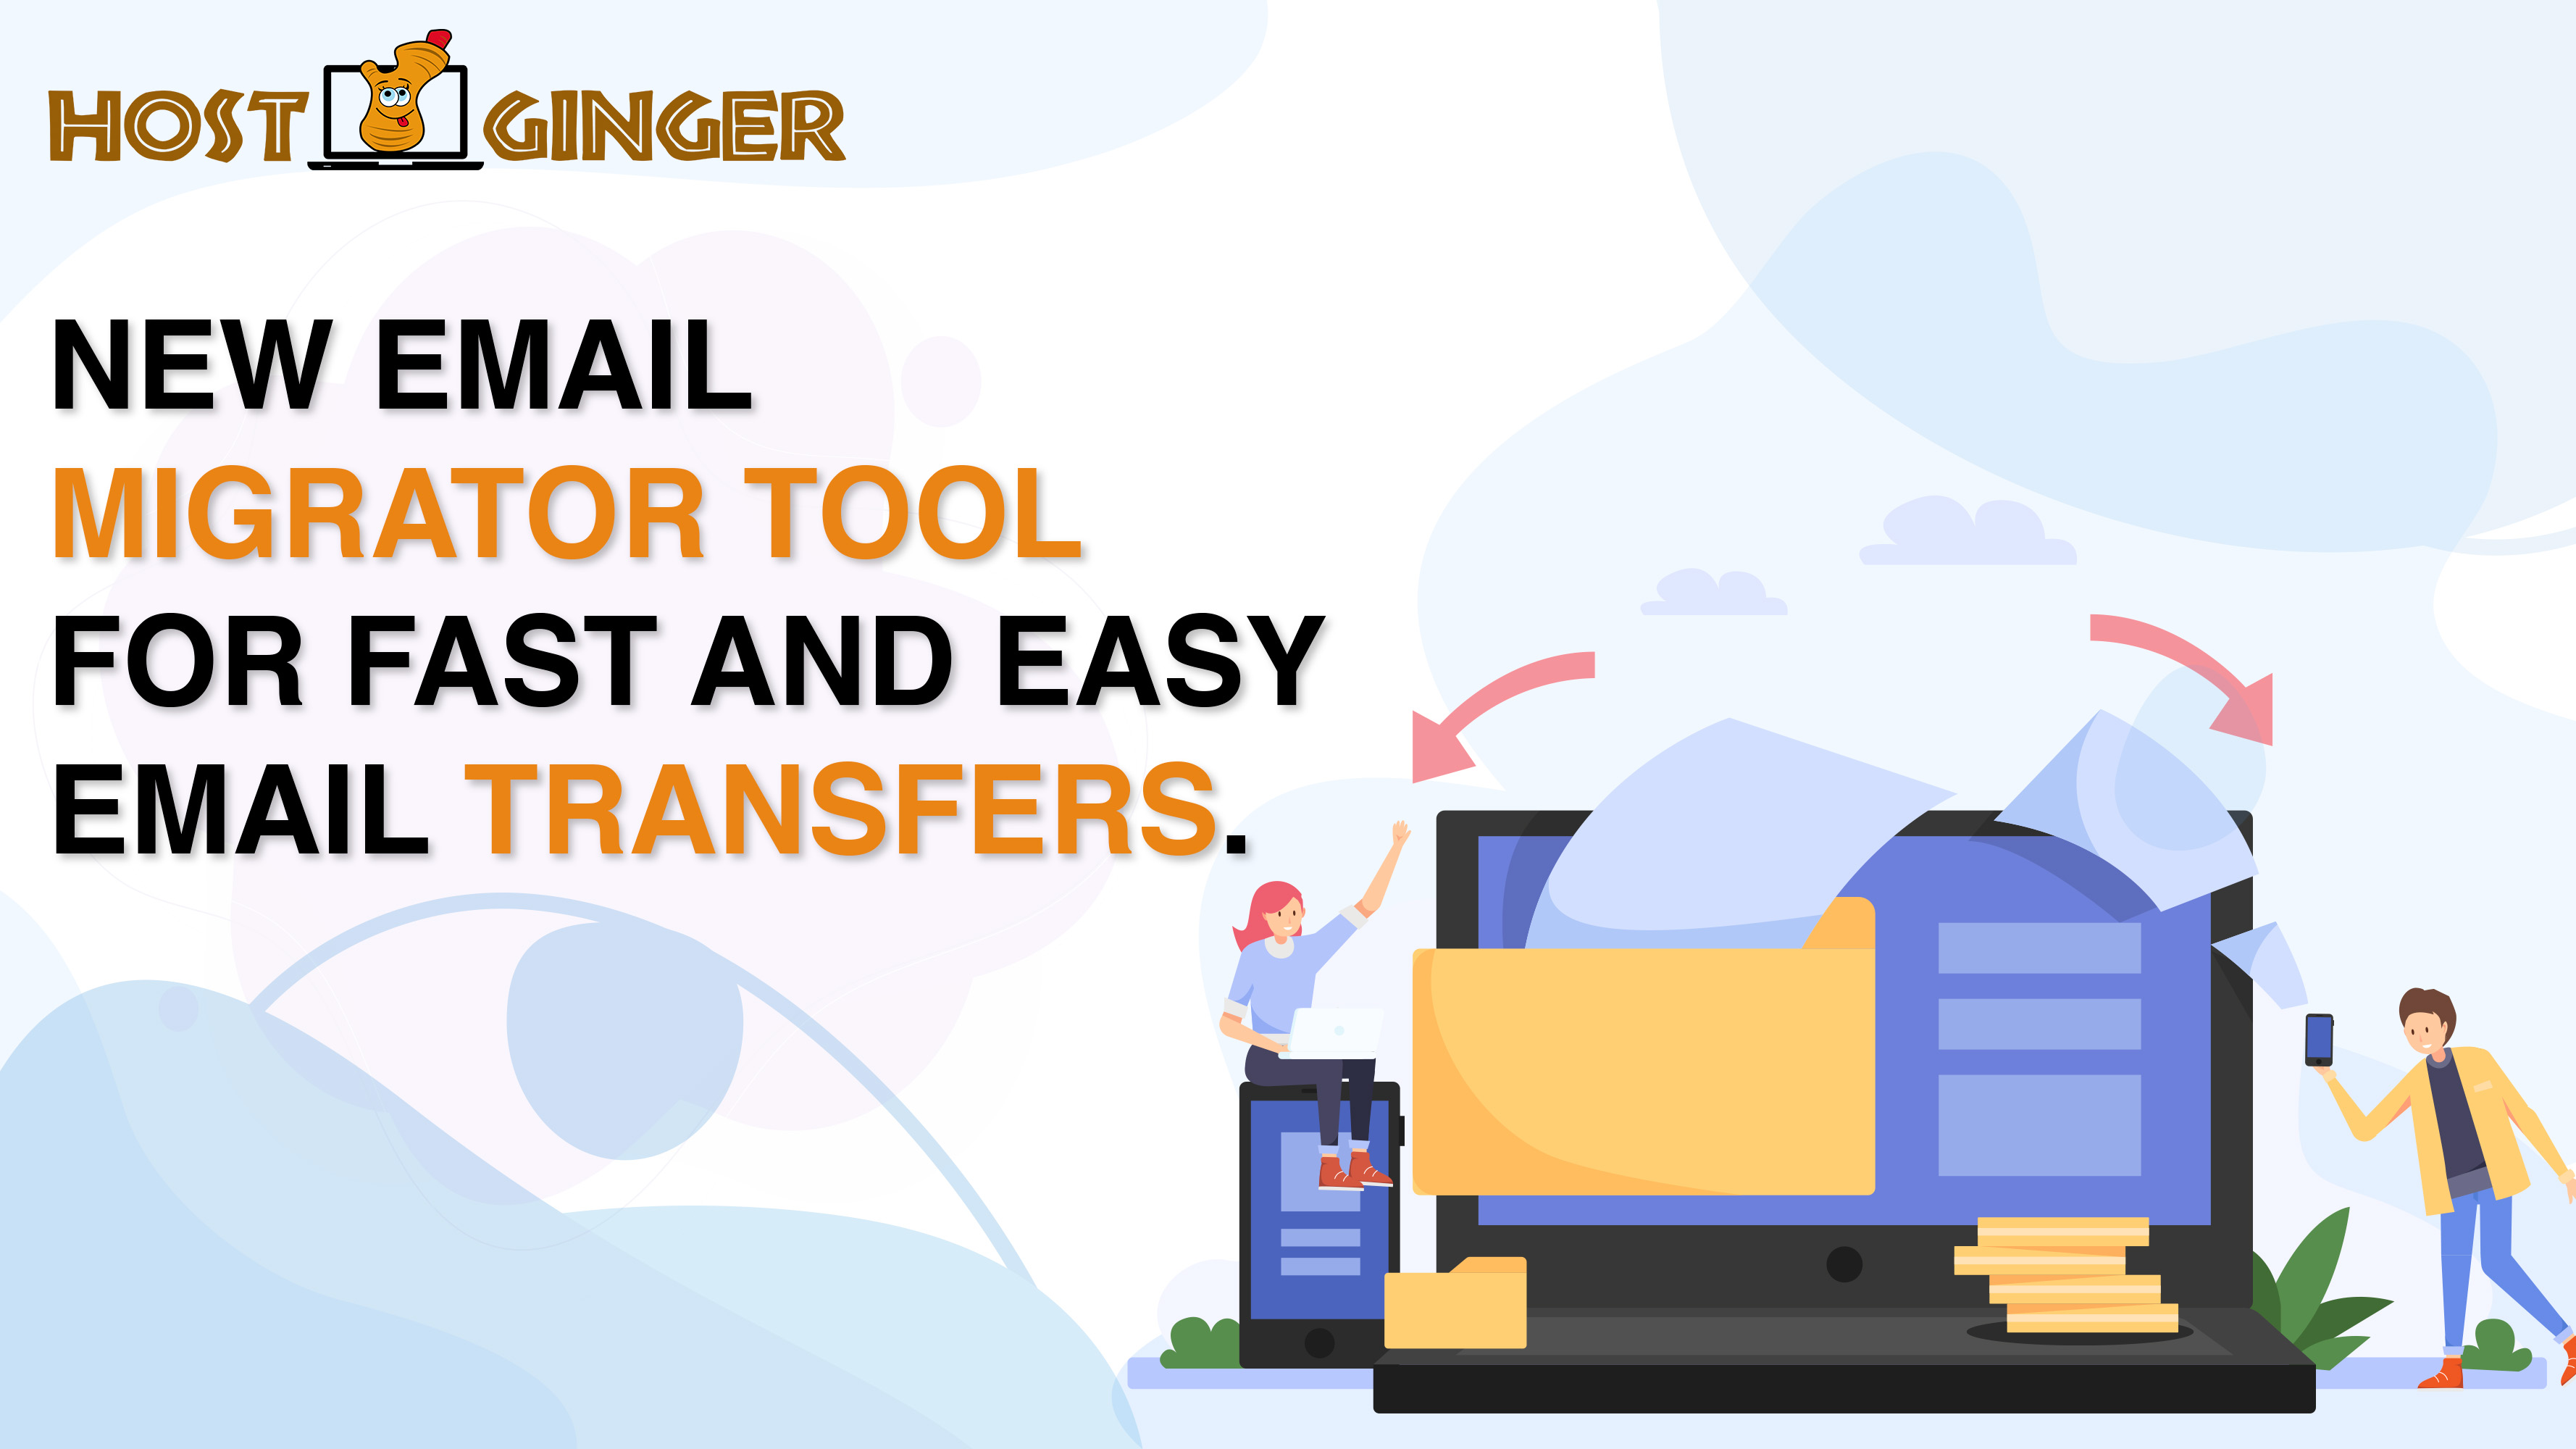 New Email Migrator Tool for Fast and Easy Email Transfers